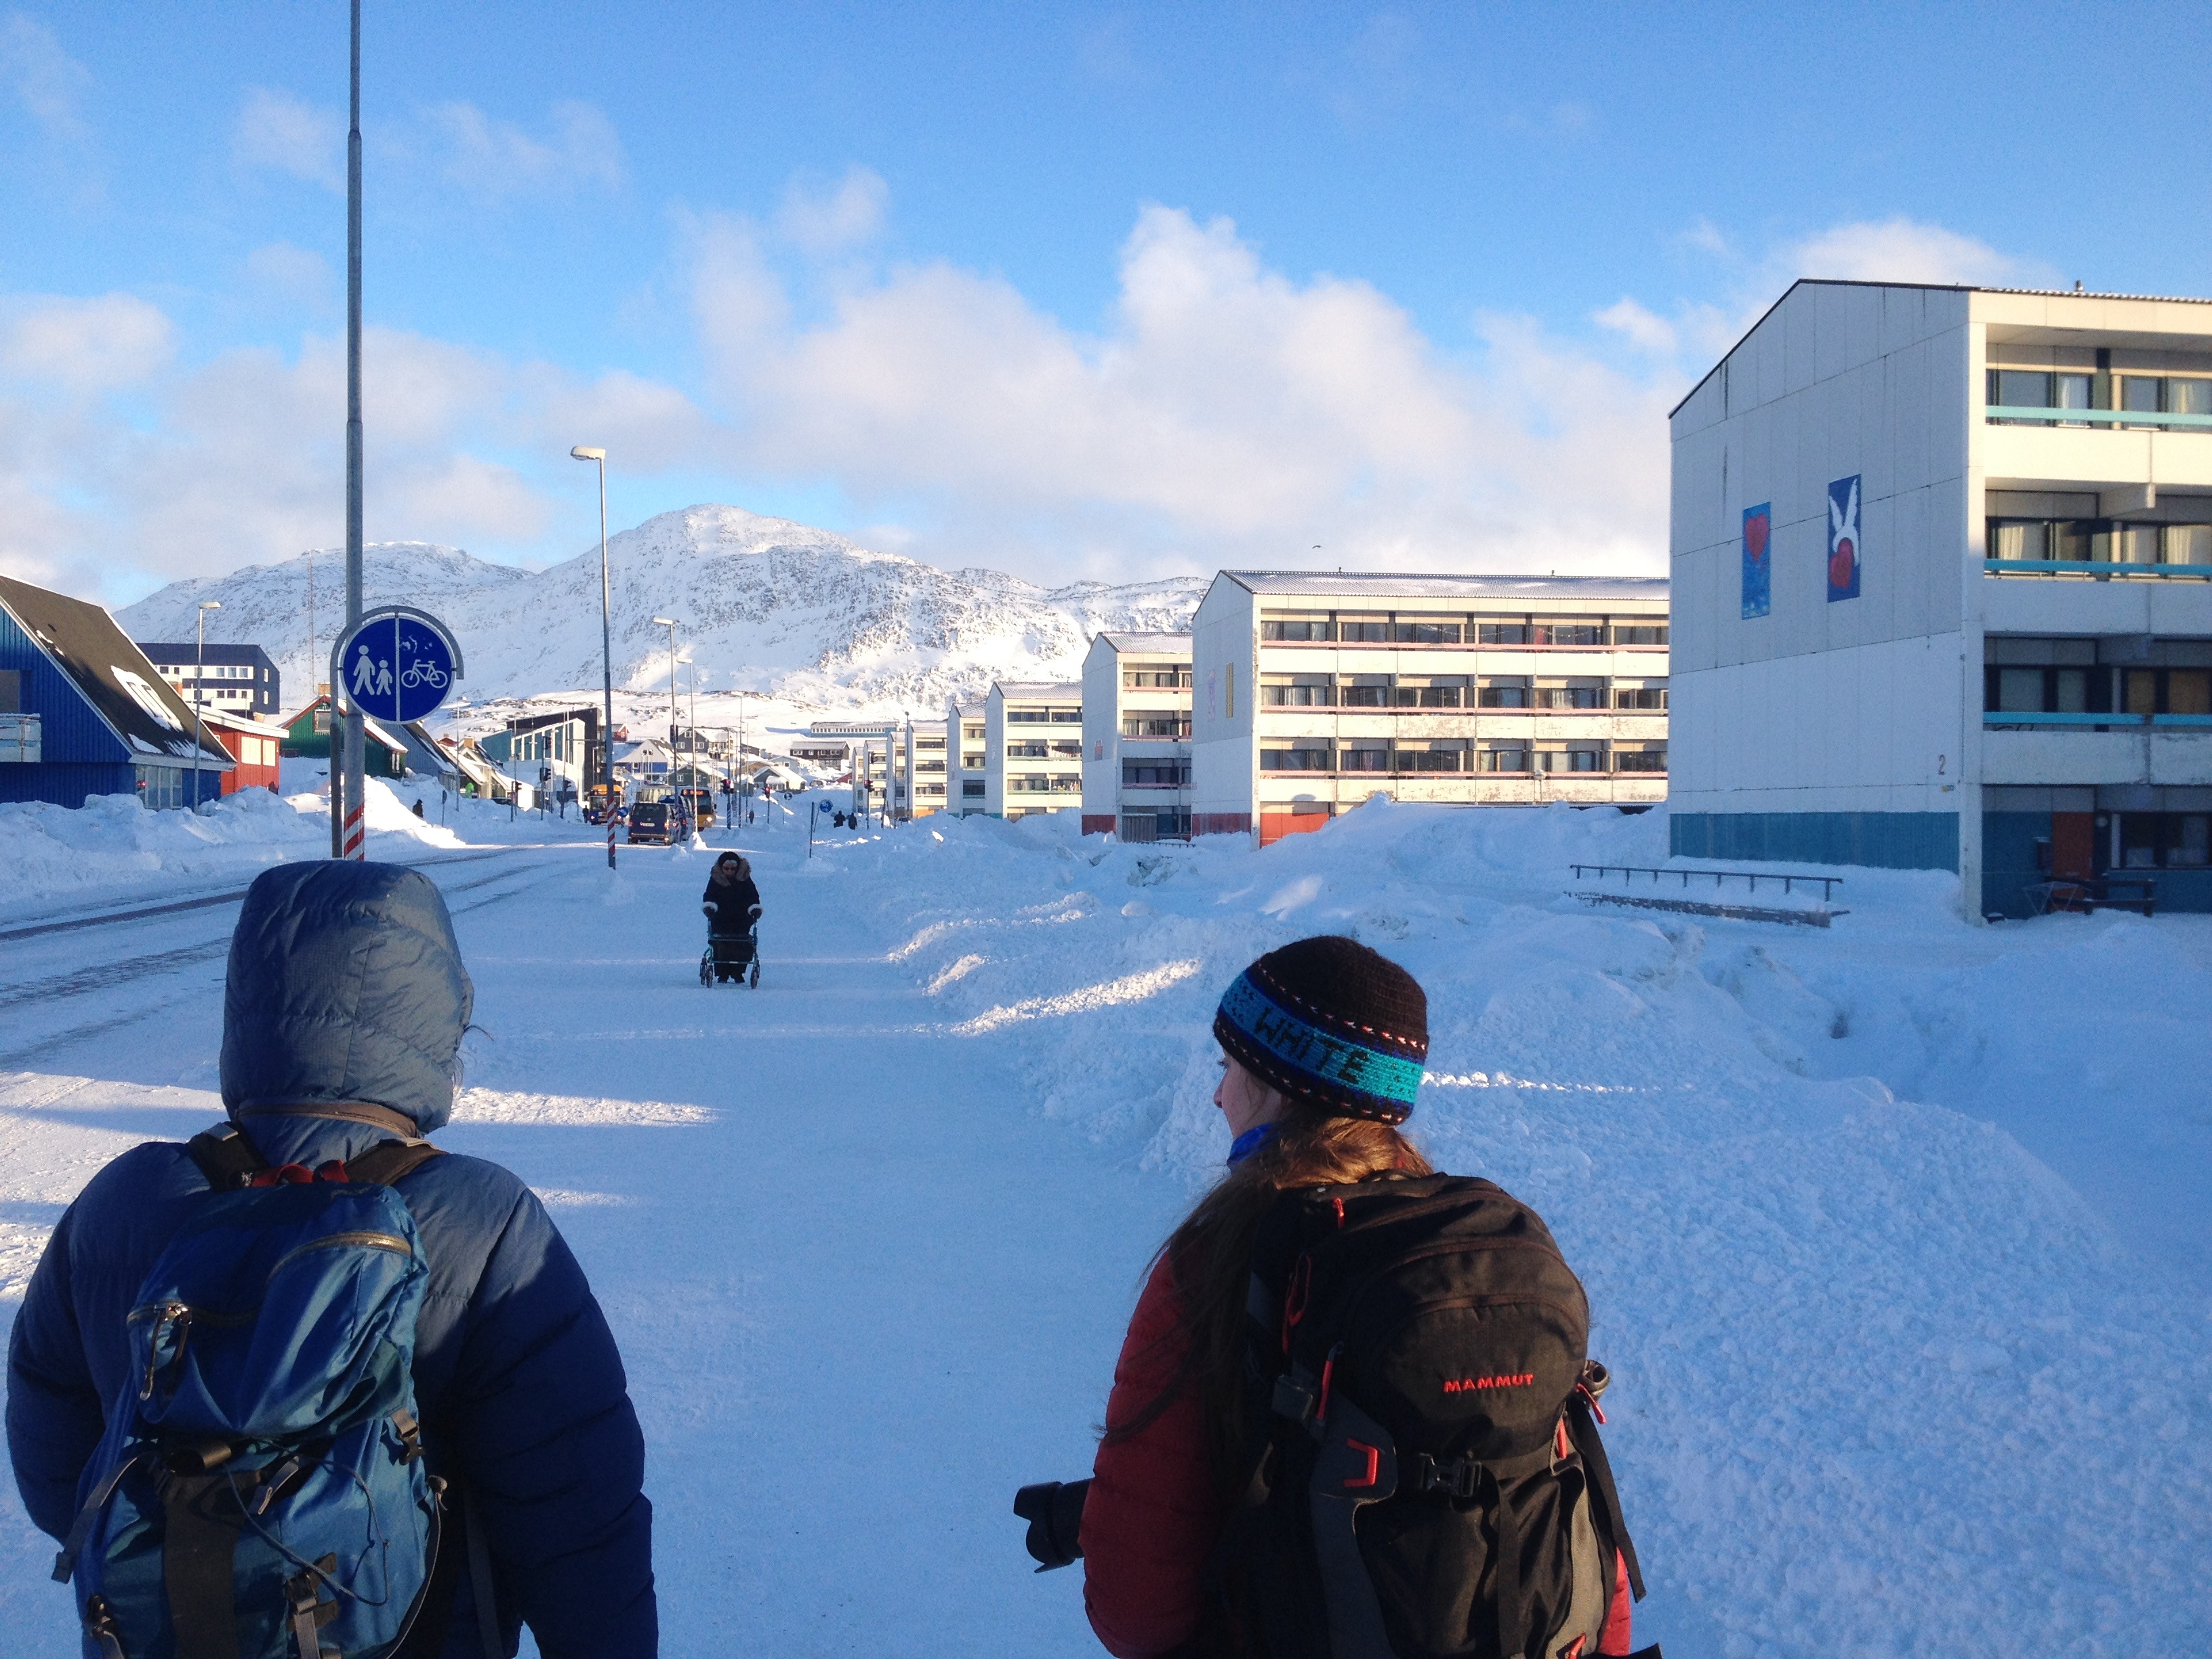 Walking through the streets of Nuuk. The large buildings to the right are residential complexes.